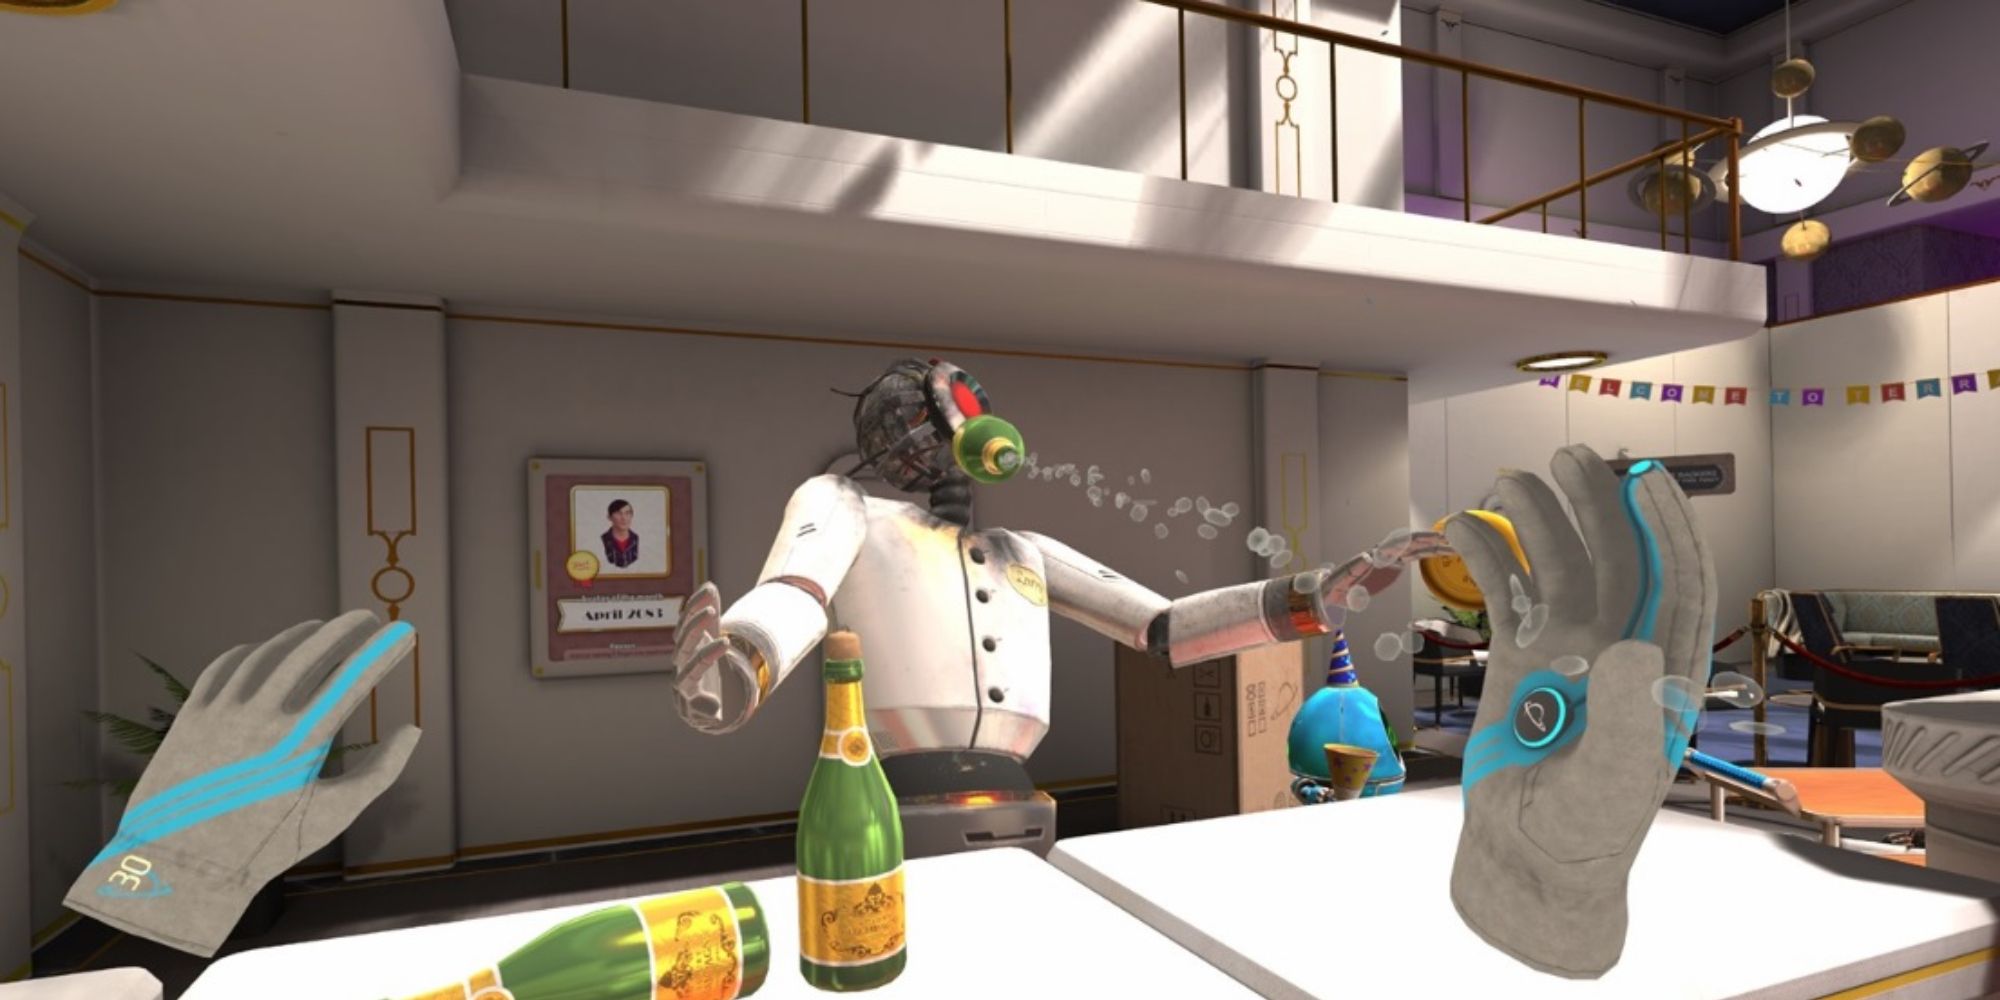 Best Puzzle VR Games a POVE shot from the game Time Stall of a robot in a chef's outfit being hit in the face by a champagne bottle